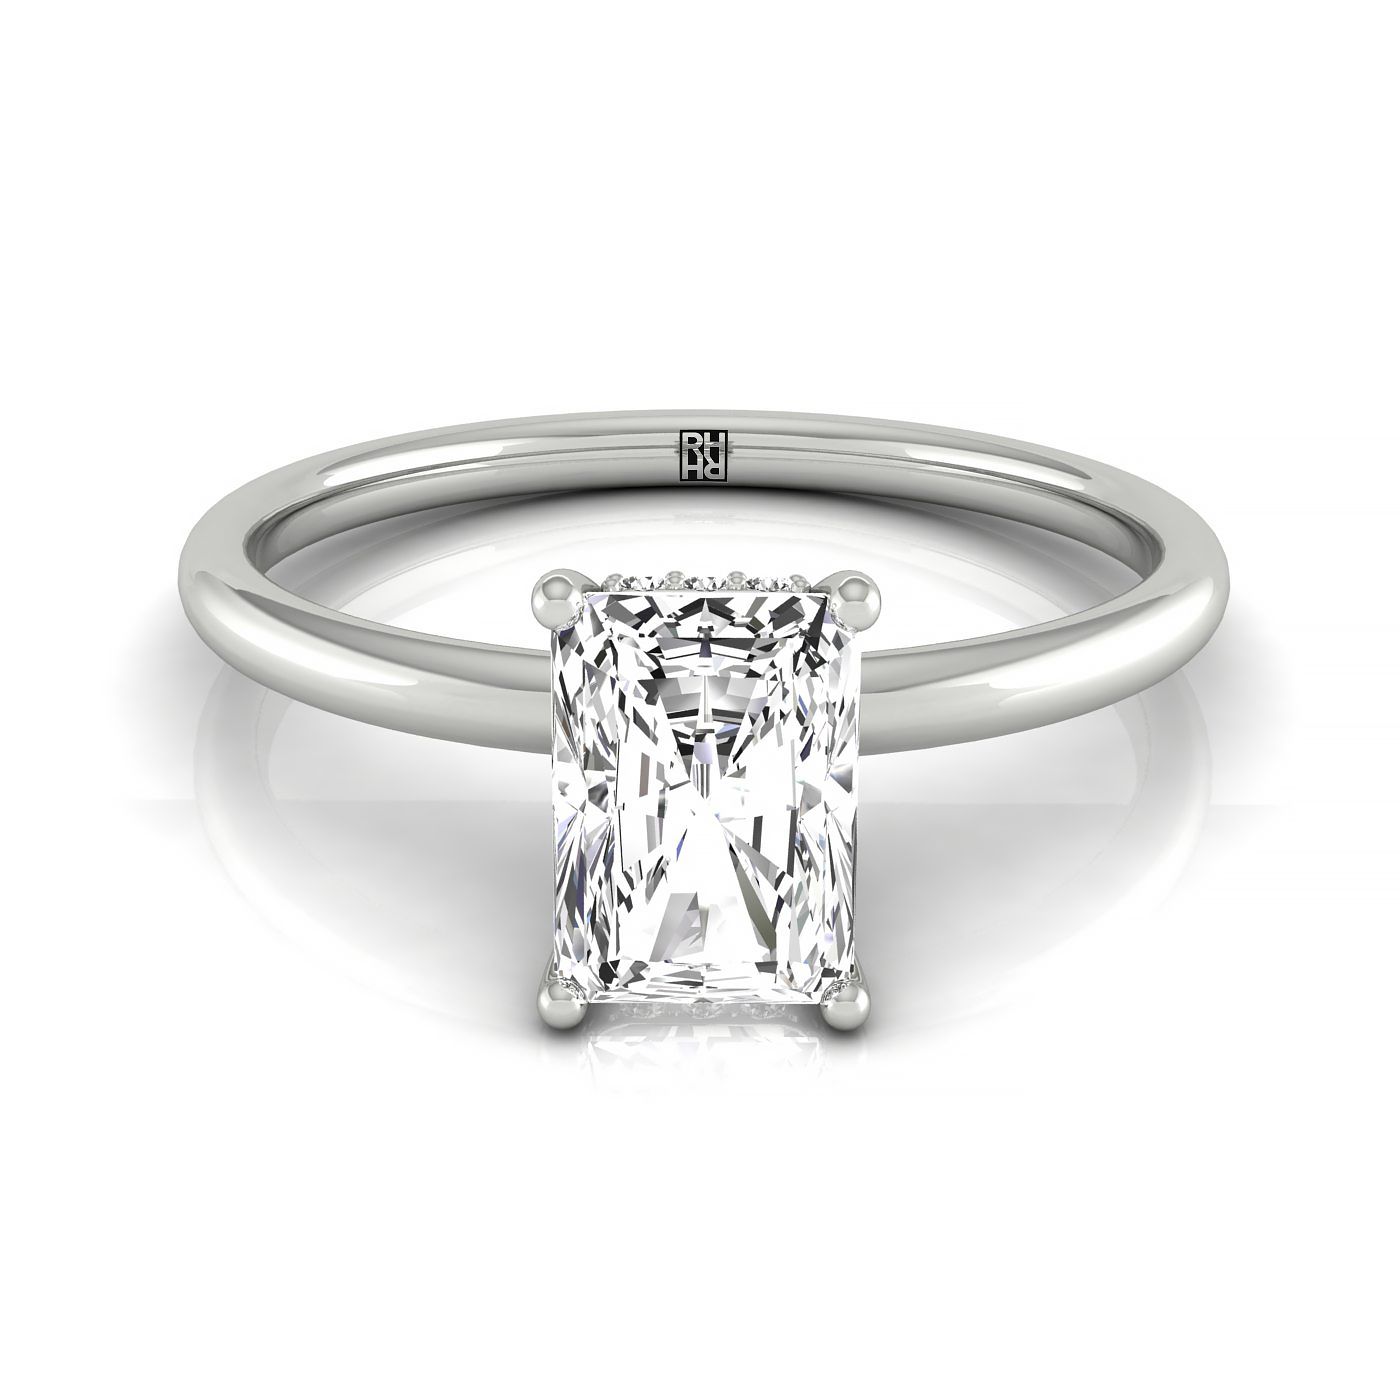 18kw Radiant Solitaire Engagement Ring With Upper Hidden Halo With 16 Prong Set Round Diamonds